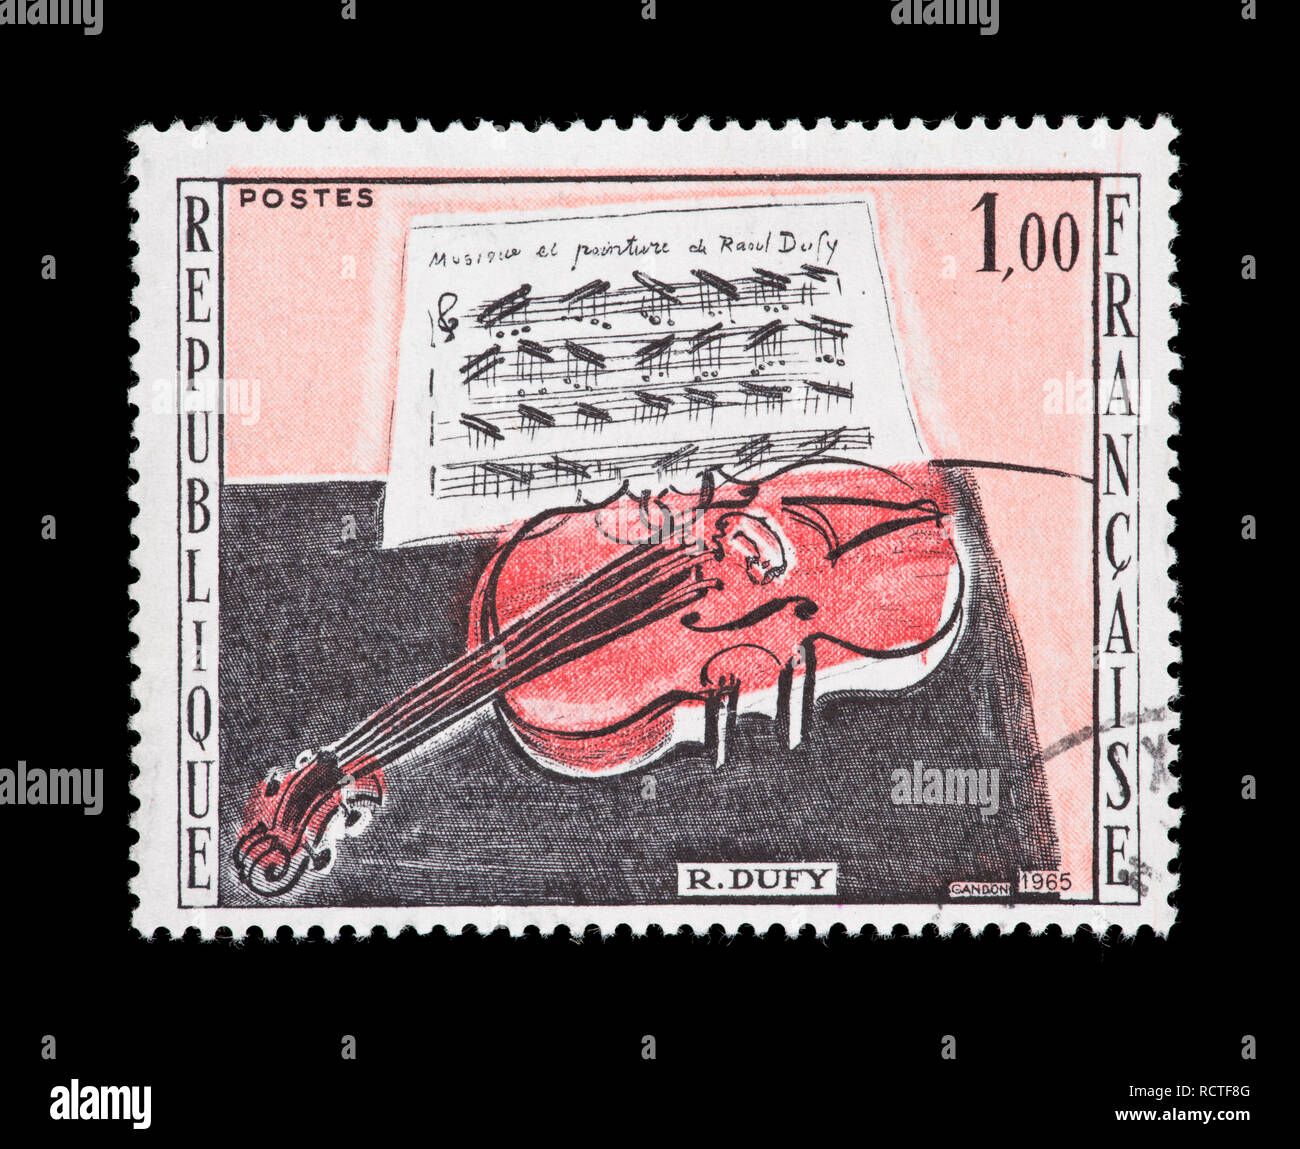 Postage stamp from France depicting the Raoul Dufy painting The Red Violin Stock Photo